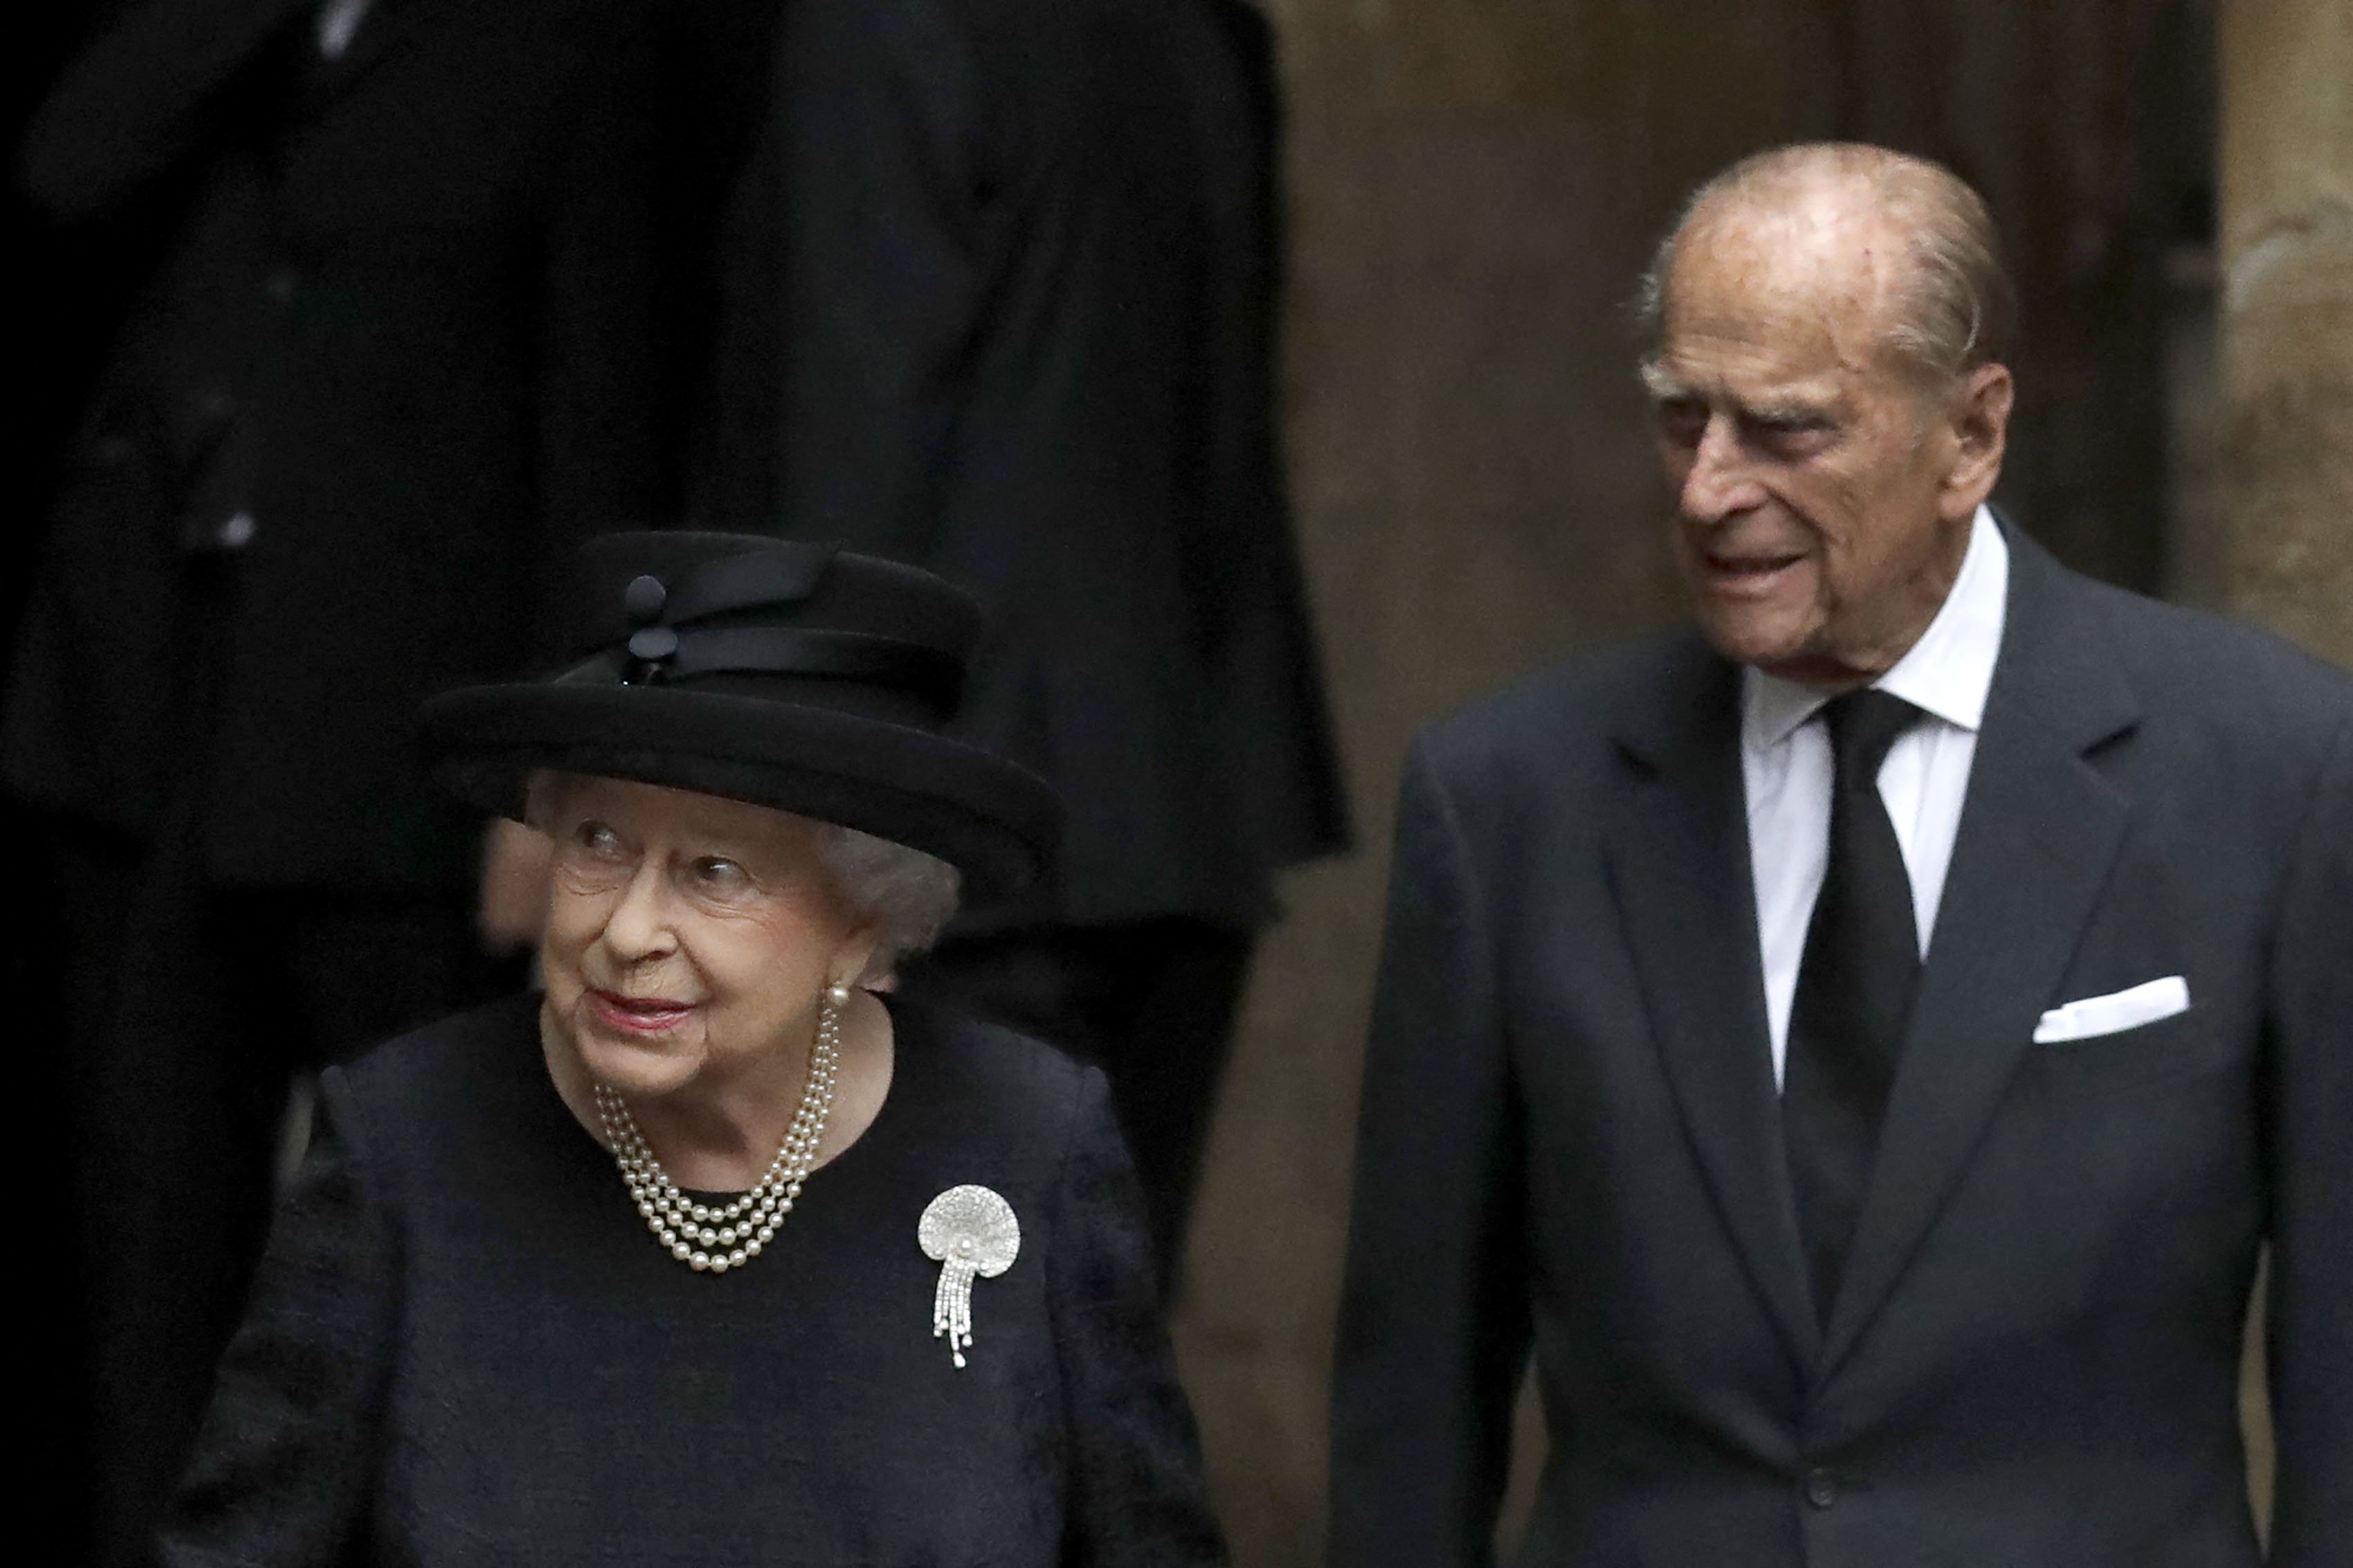 Queen Elizabeth II and Britain's Prince Philip, Duke of Edinburgh leave after the funeral service of the 2nd Countess Mountbatten of Burma, Patricia Knatchbull at St Paul's Church in Knightsbridge, London on June 27, 2017 | Source: Getty Images 